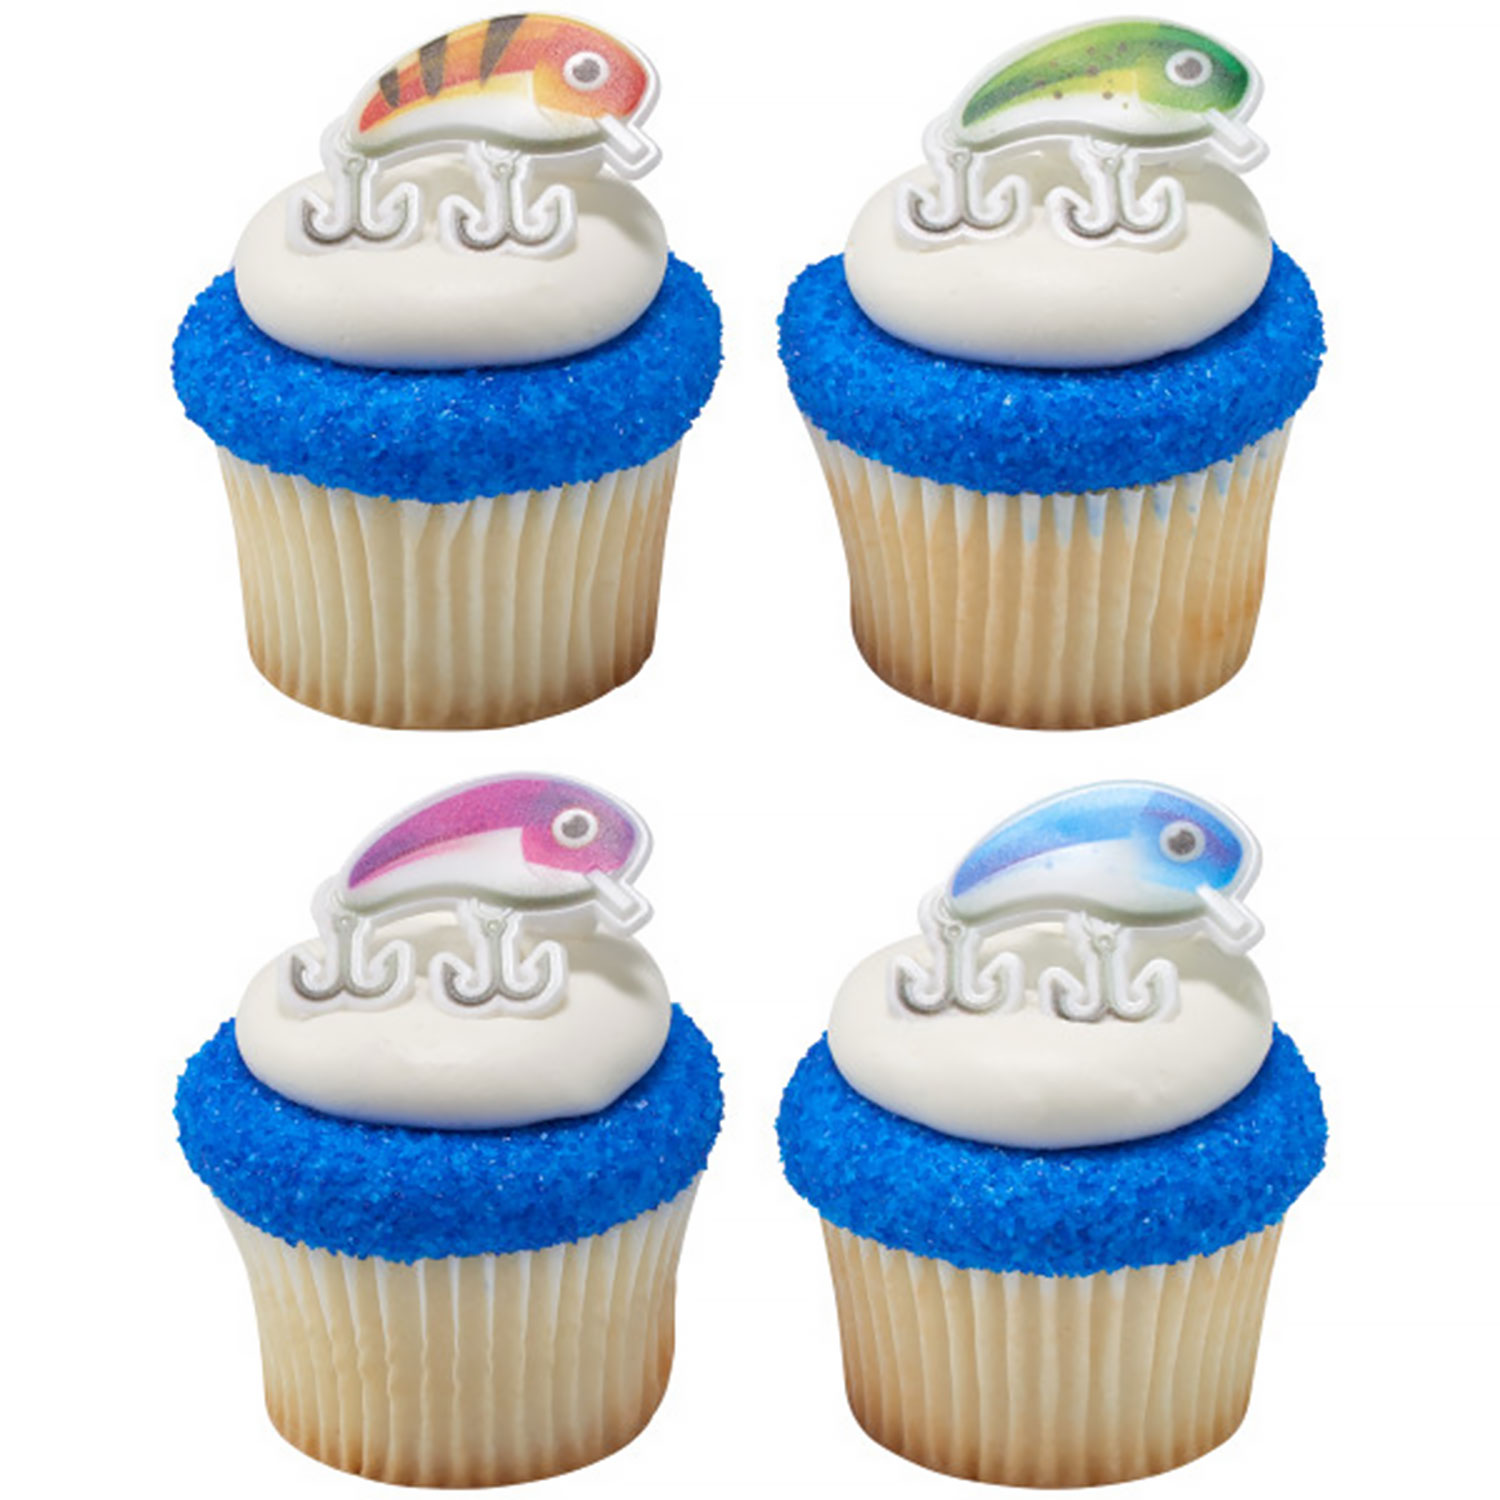 24 Fishing Lure Cupcake Rings Toppers